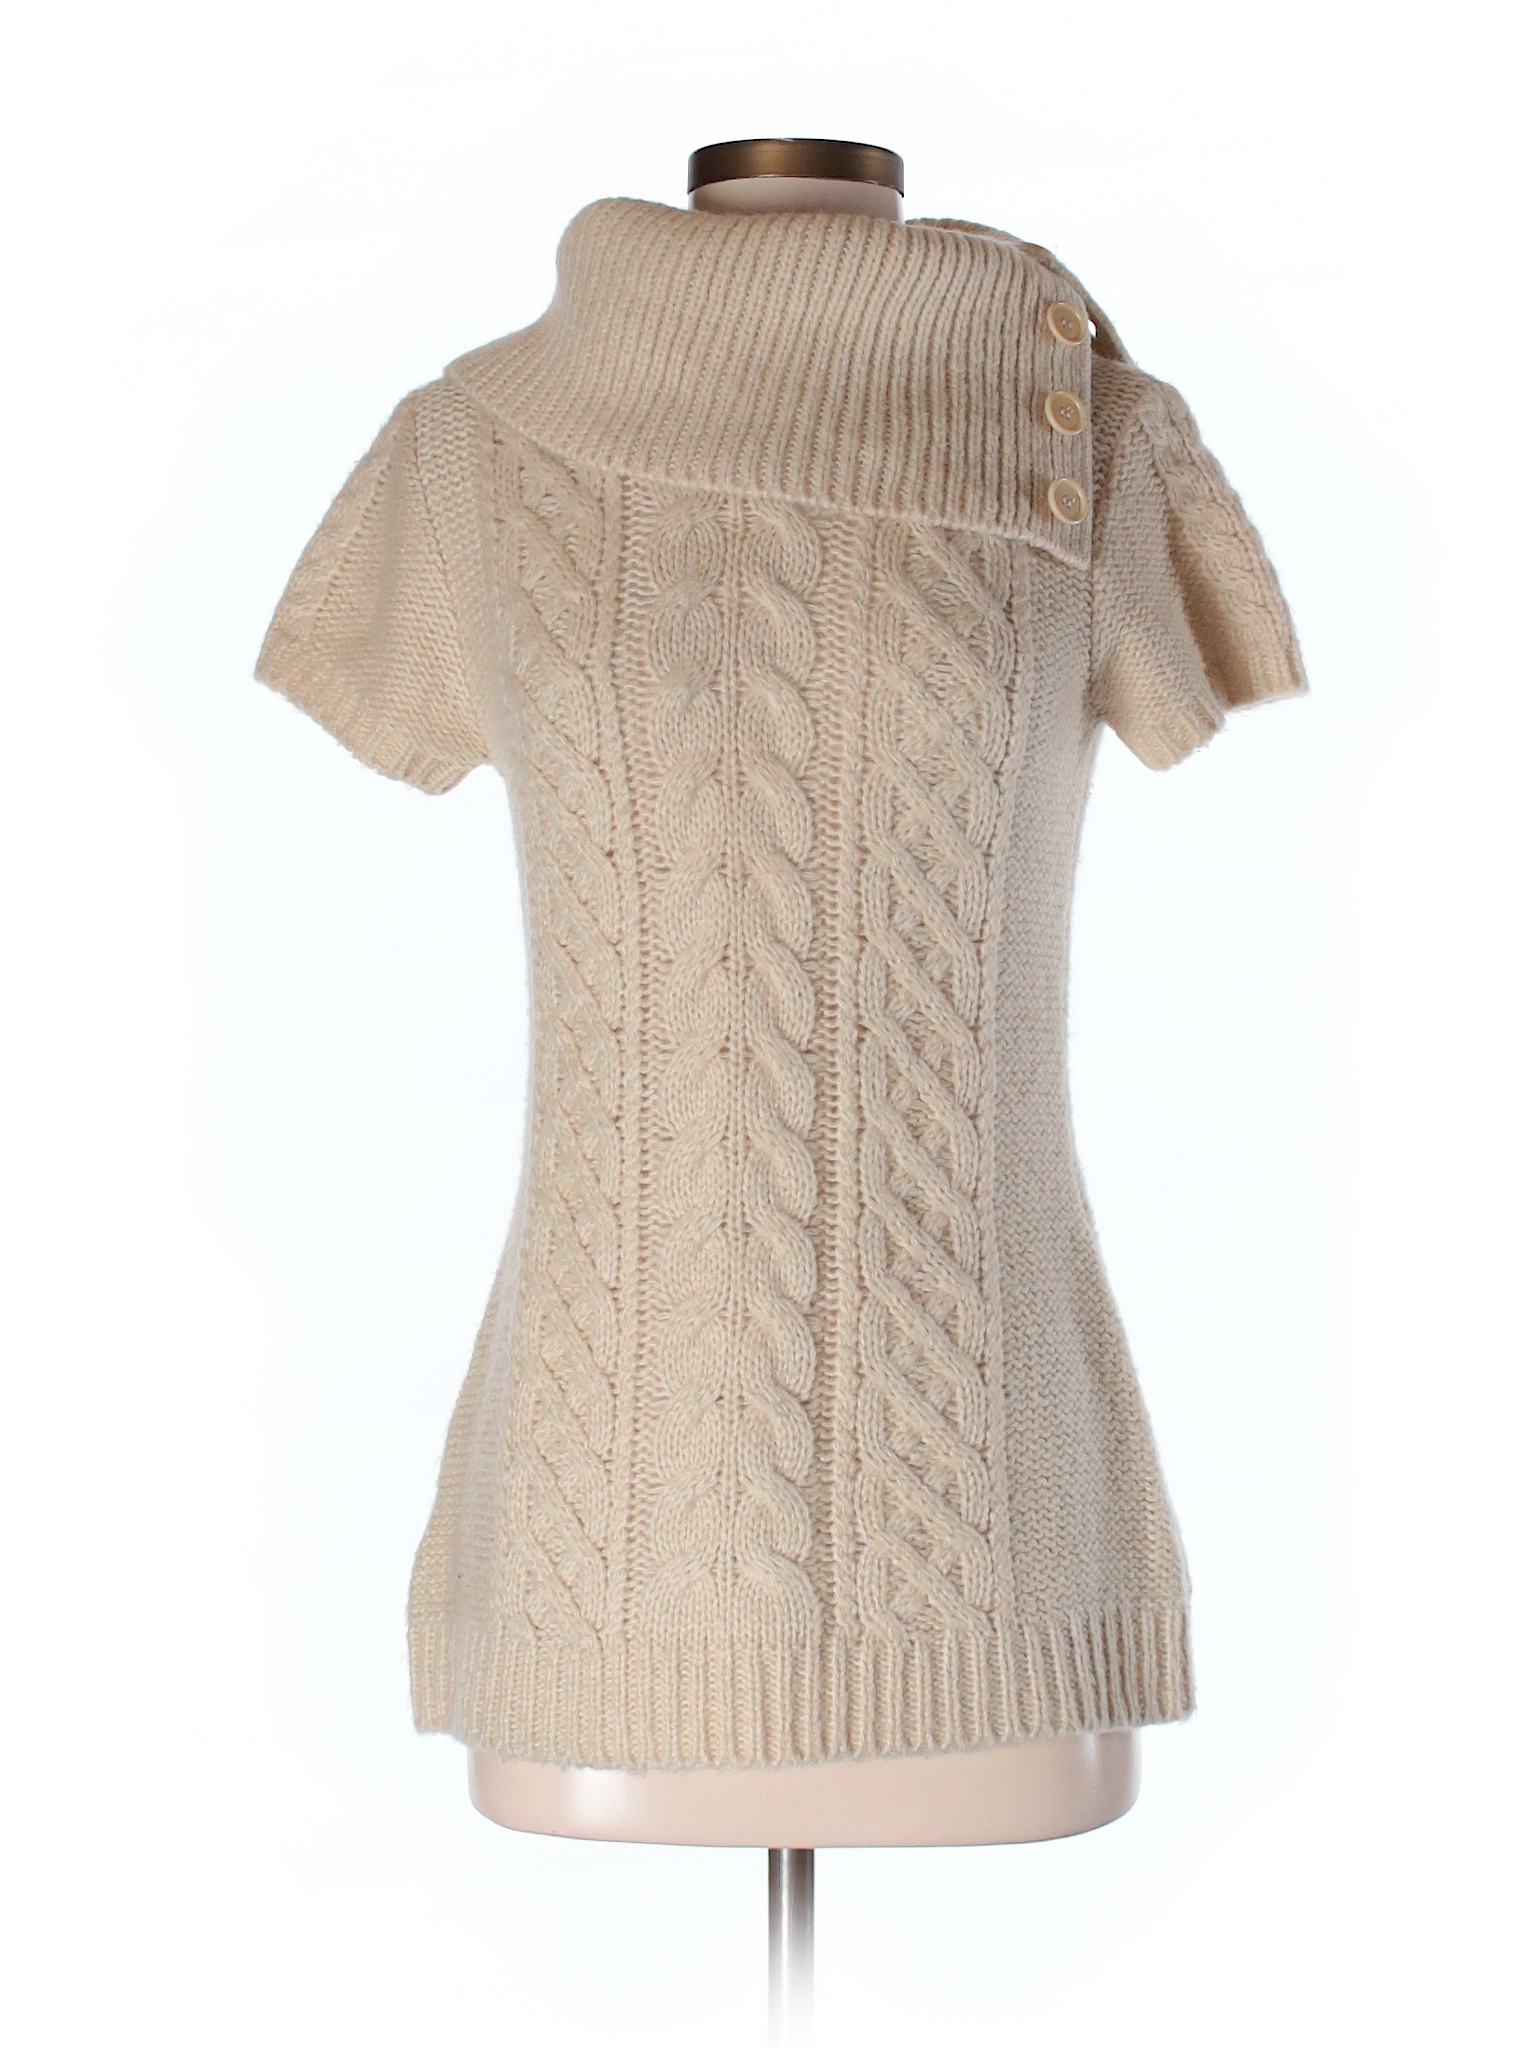 Bcbgmaxazria Pullover Sweater - 78% off only on thredUP